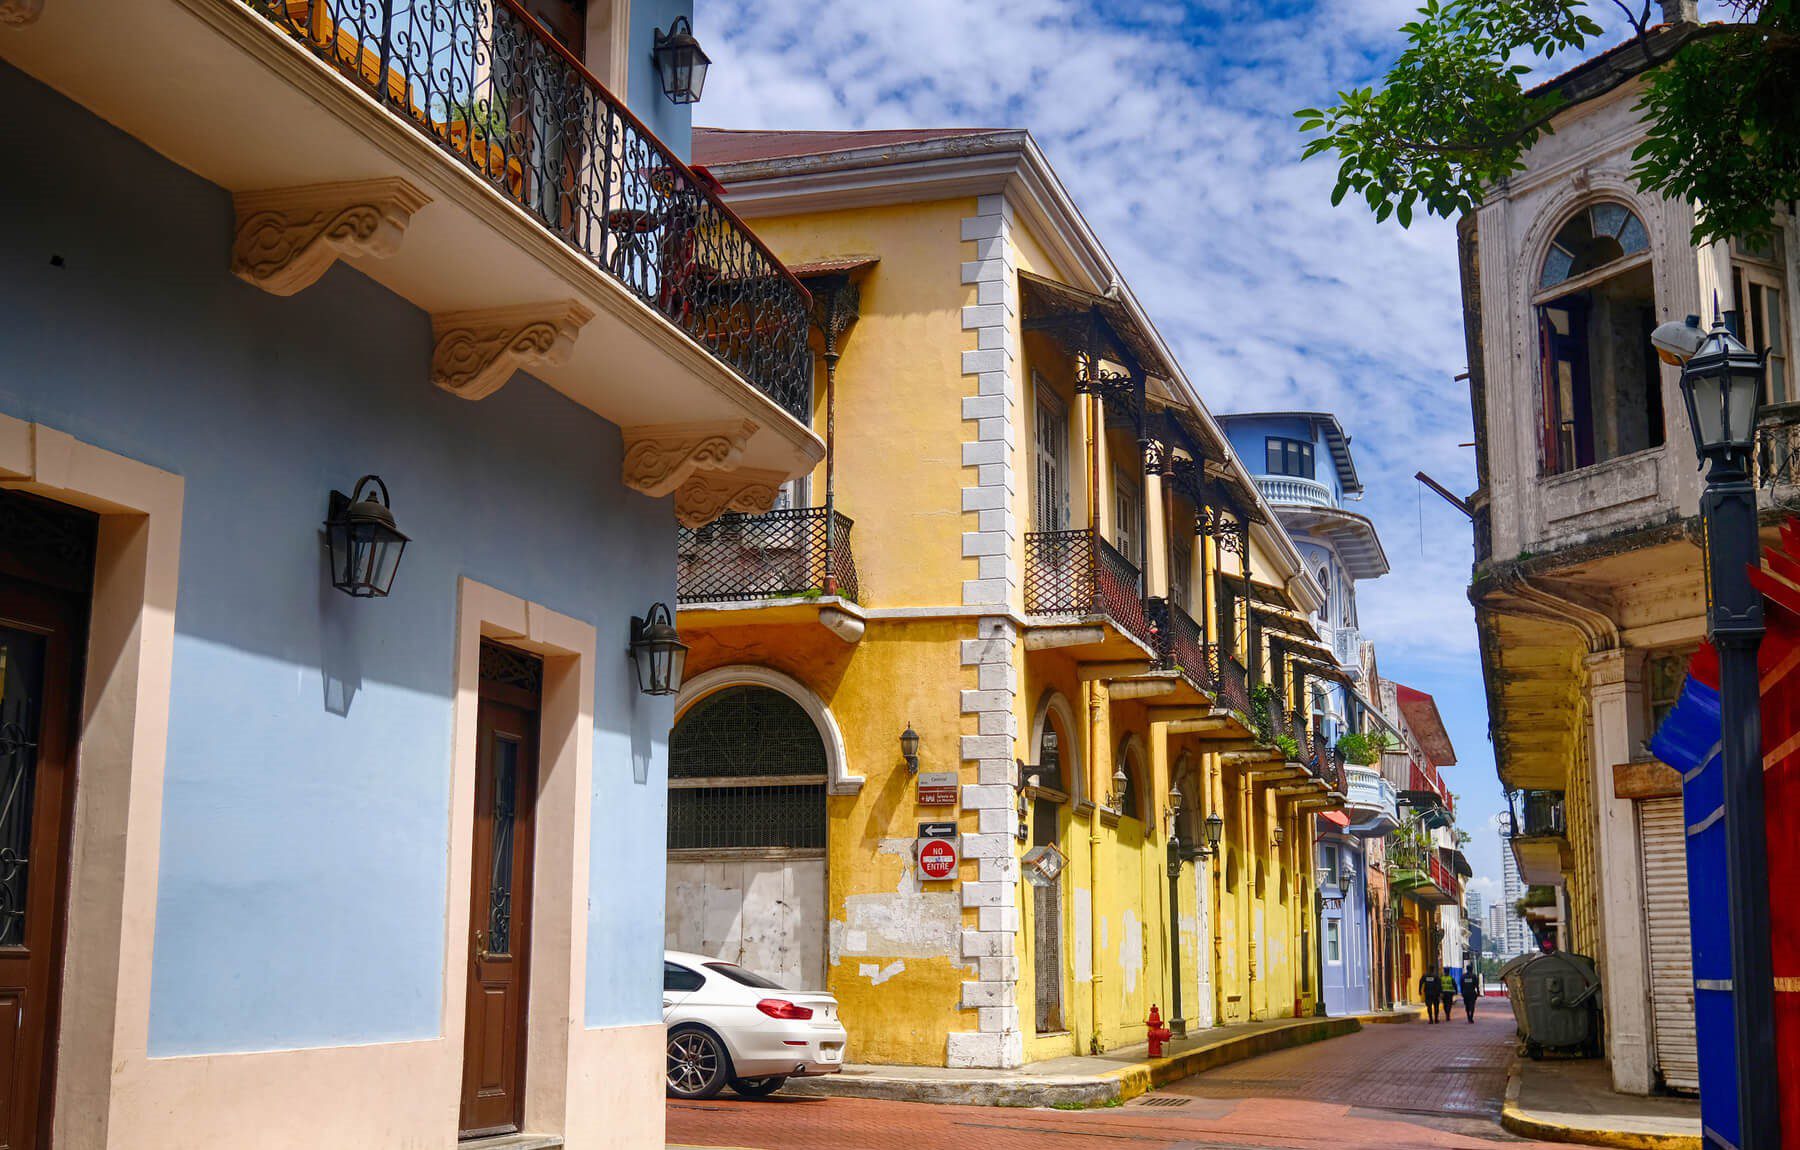 A colourful street in Panama City